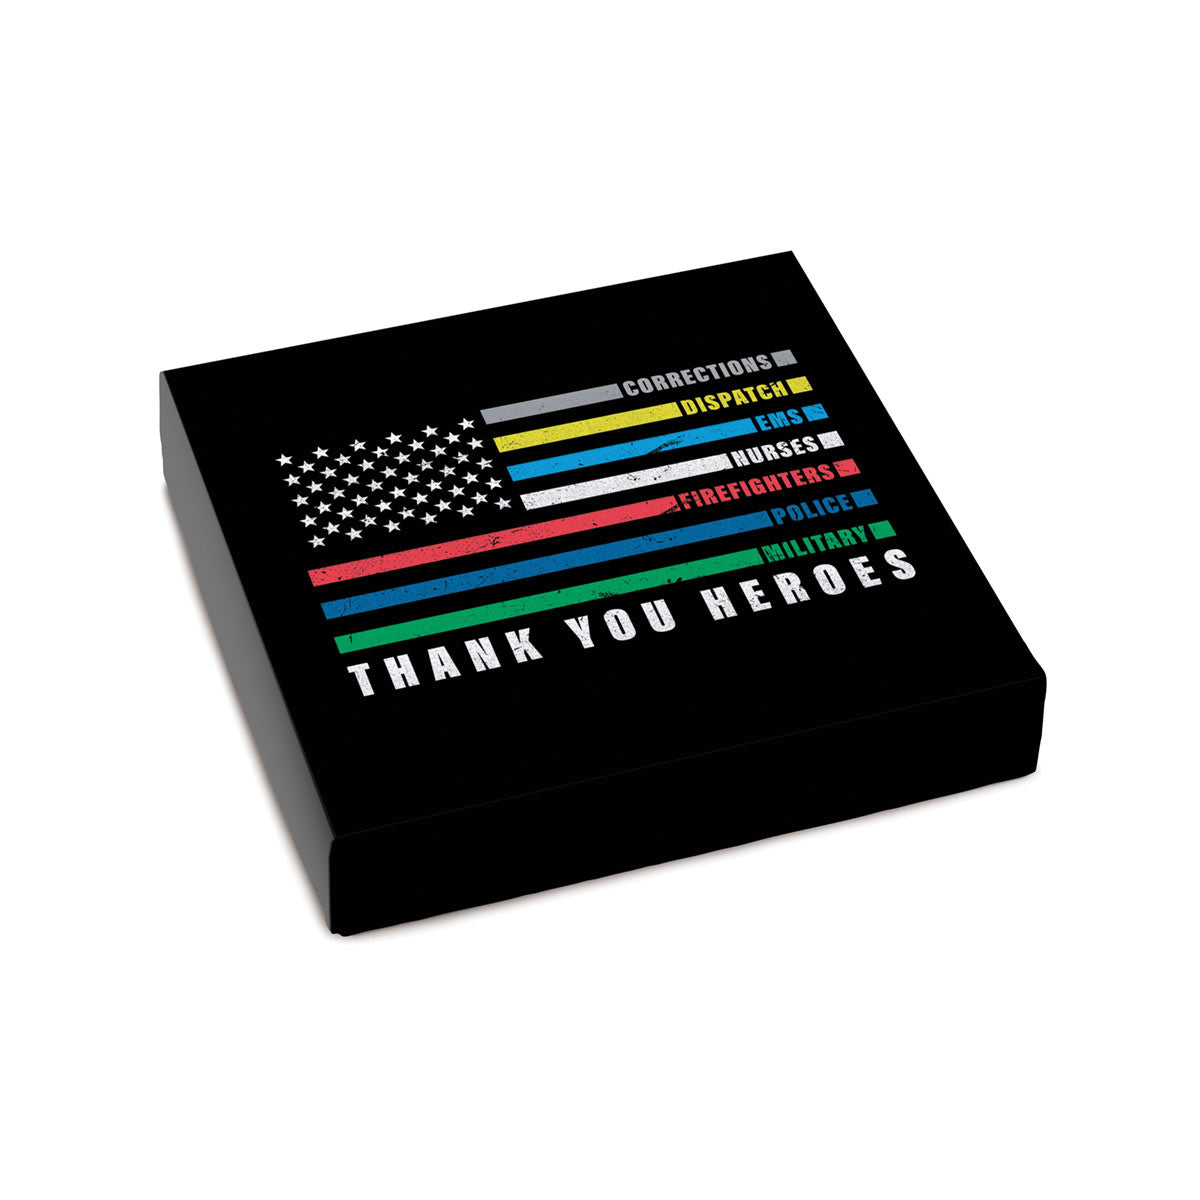 Thank You Heroes Themed Box Cover for 16 Piece Holiday Assortment